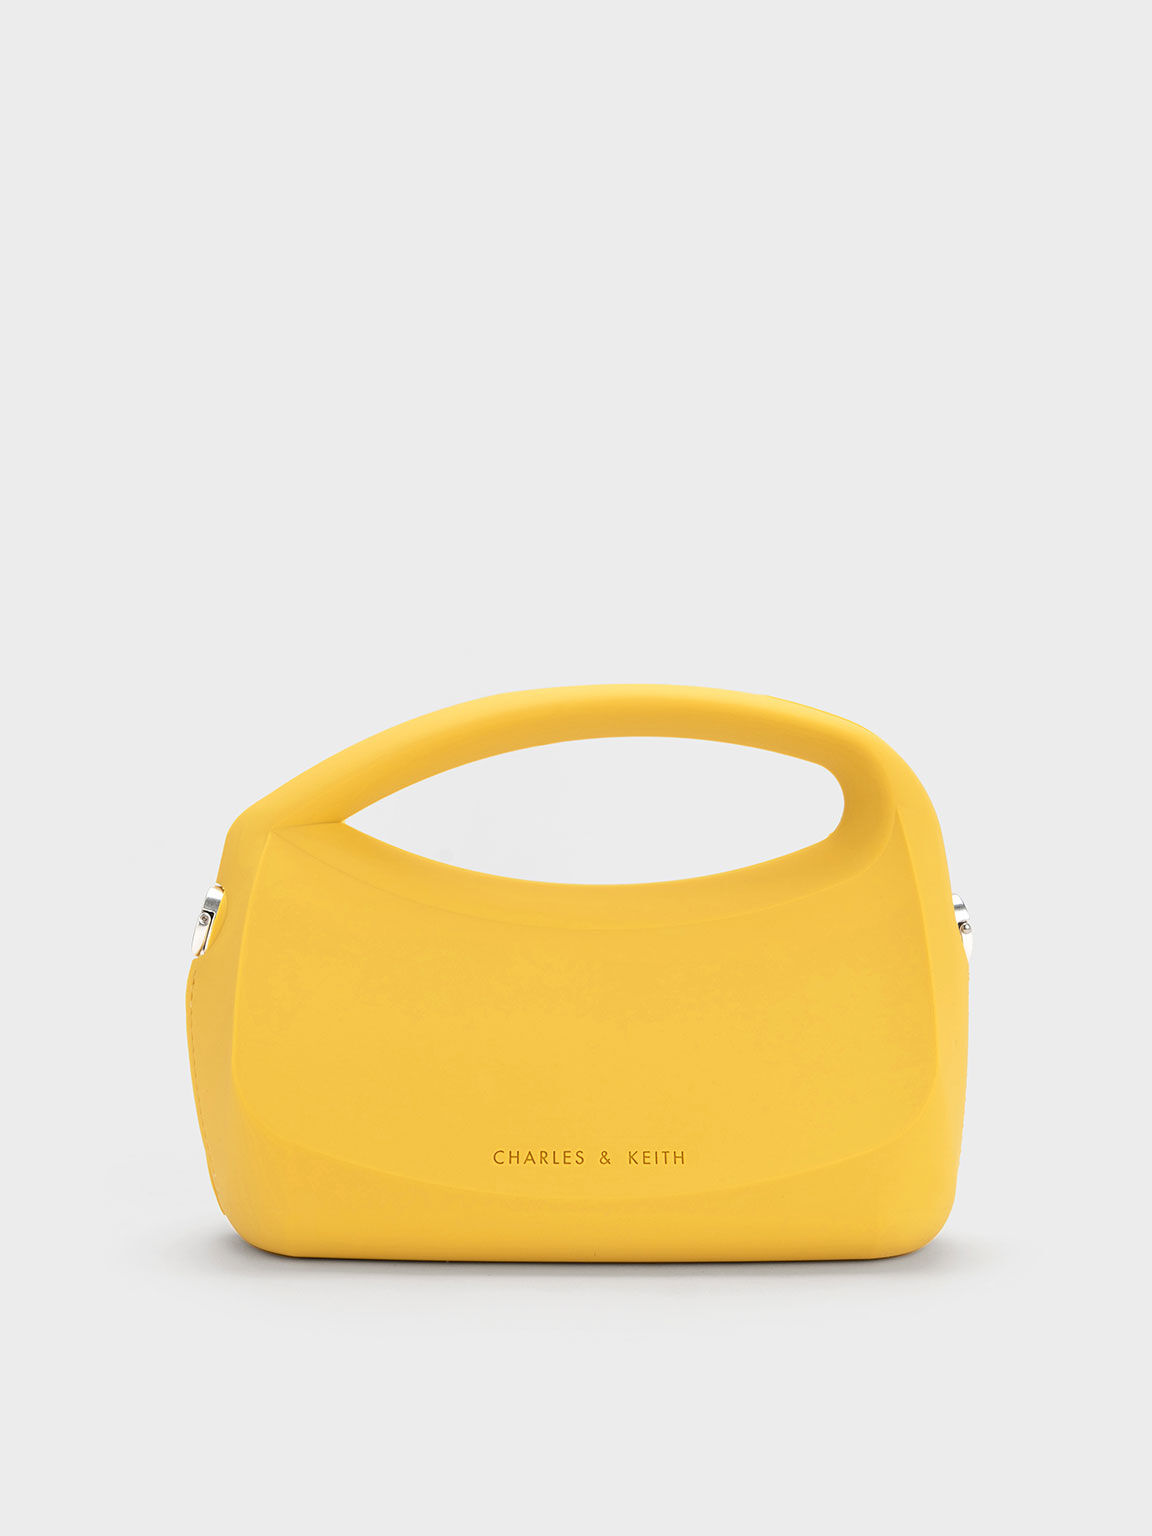 Buy Urban Bags Charles And Keith Bag ( color - Yellow) Online at